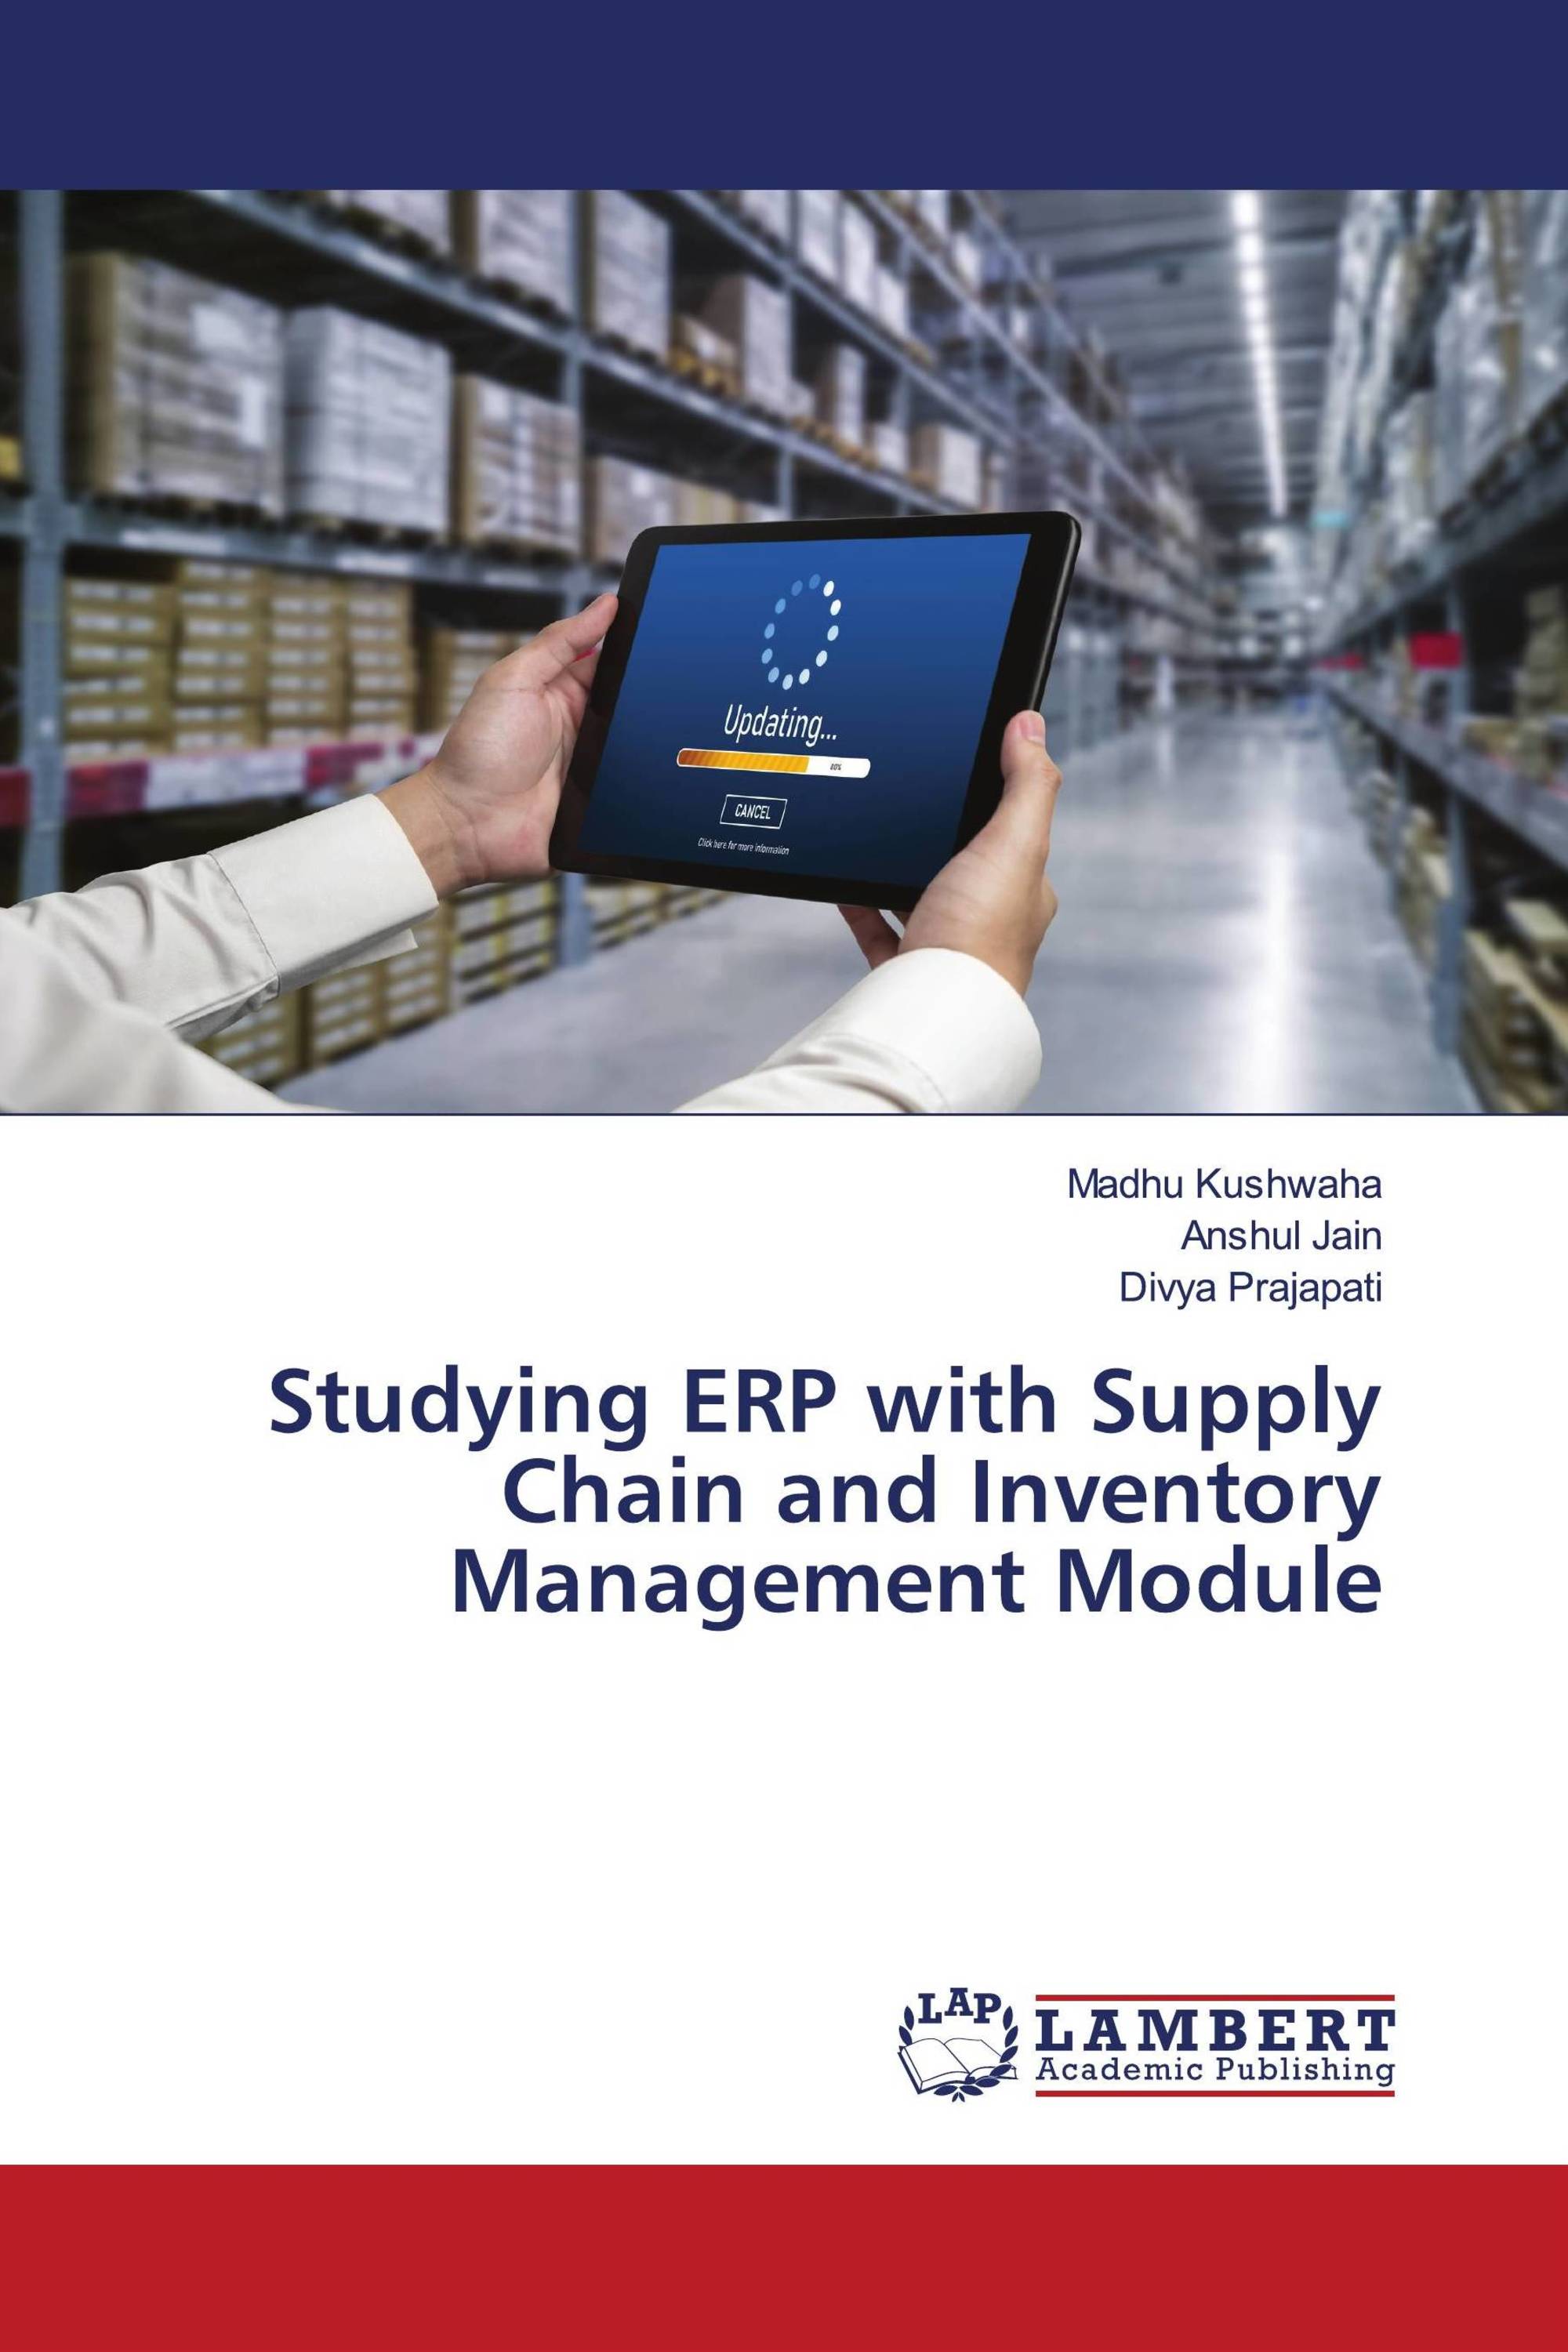 Studying ERP with Supply Chain and Inventory Management Module